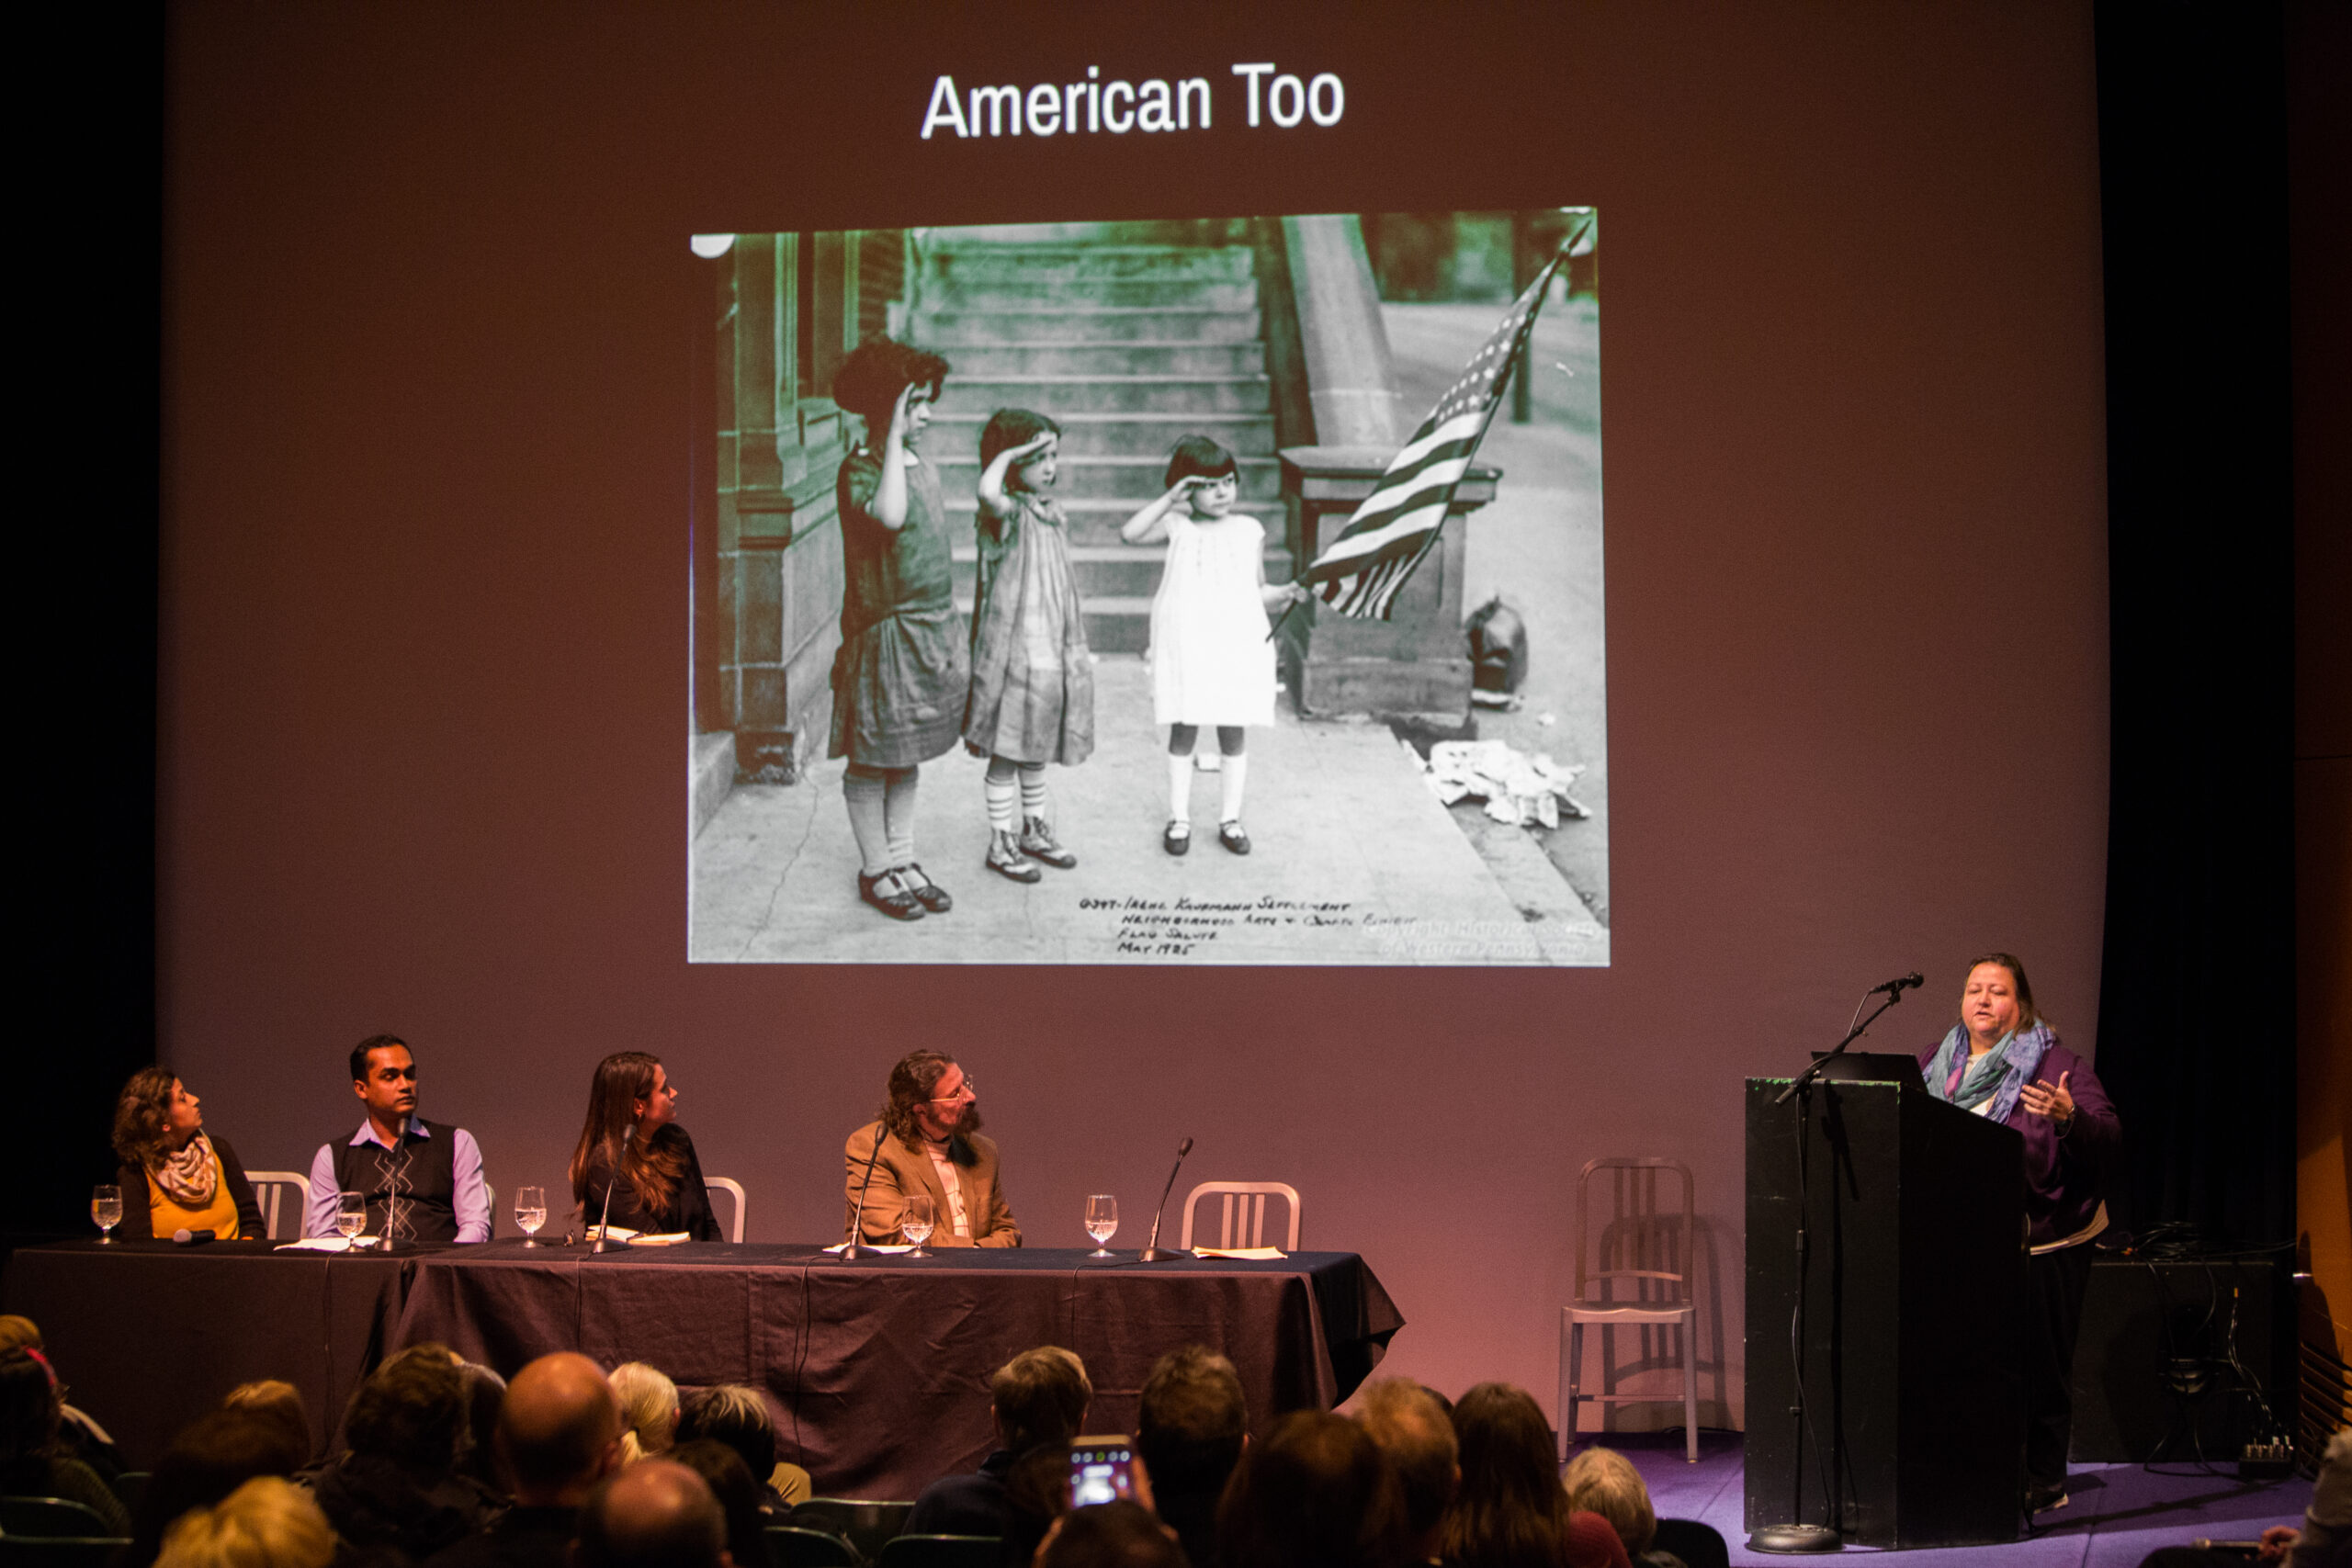 Four panelists sit at a table on the left-side of a stage. They are looking towards a woman speaking behind a lectern to the right. Behind them is projected a black and white image of three girls saluting an American flag. Above the image is the text American Too.